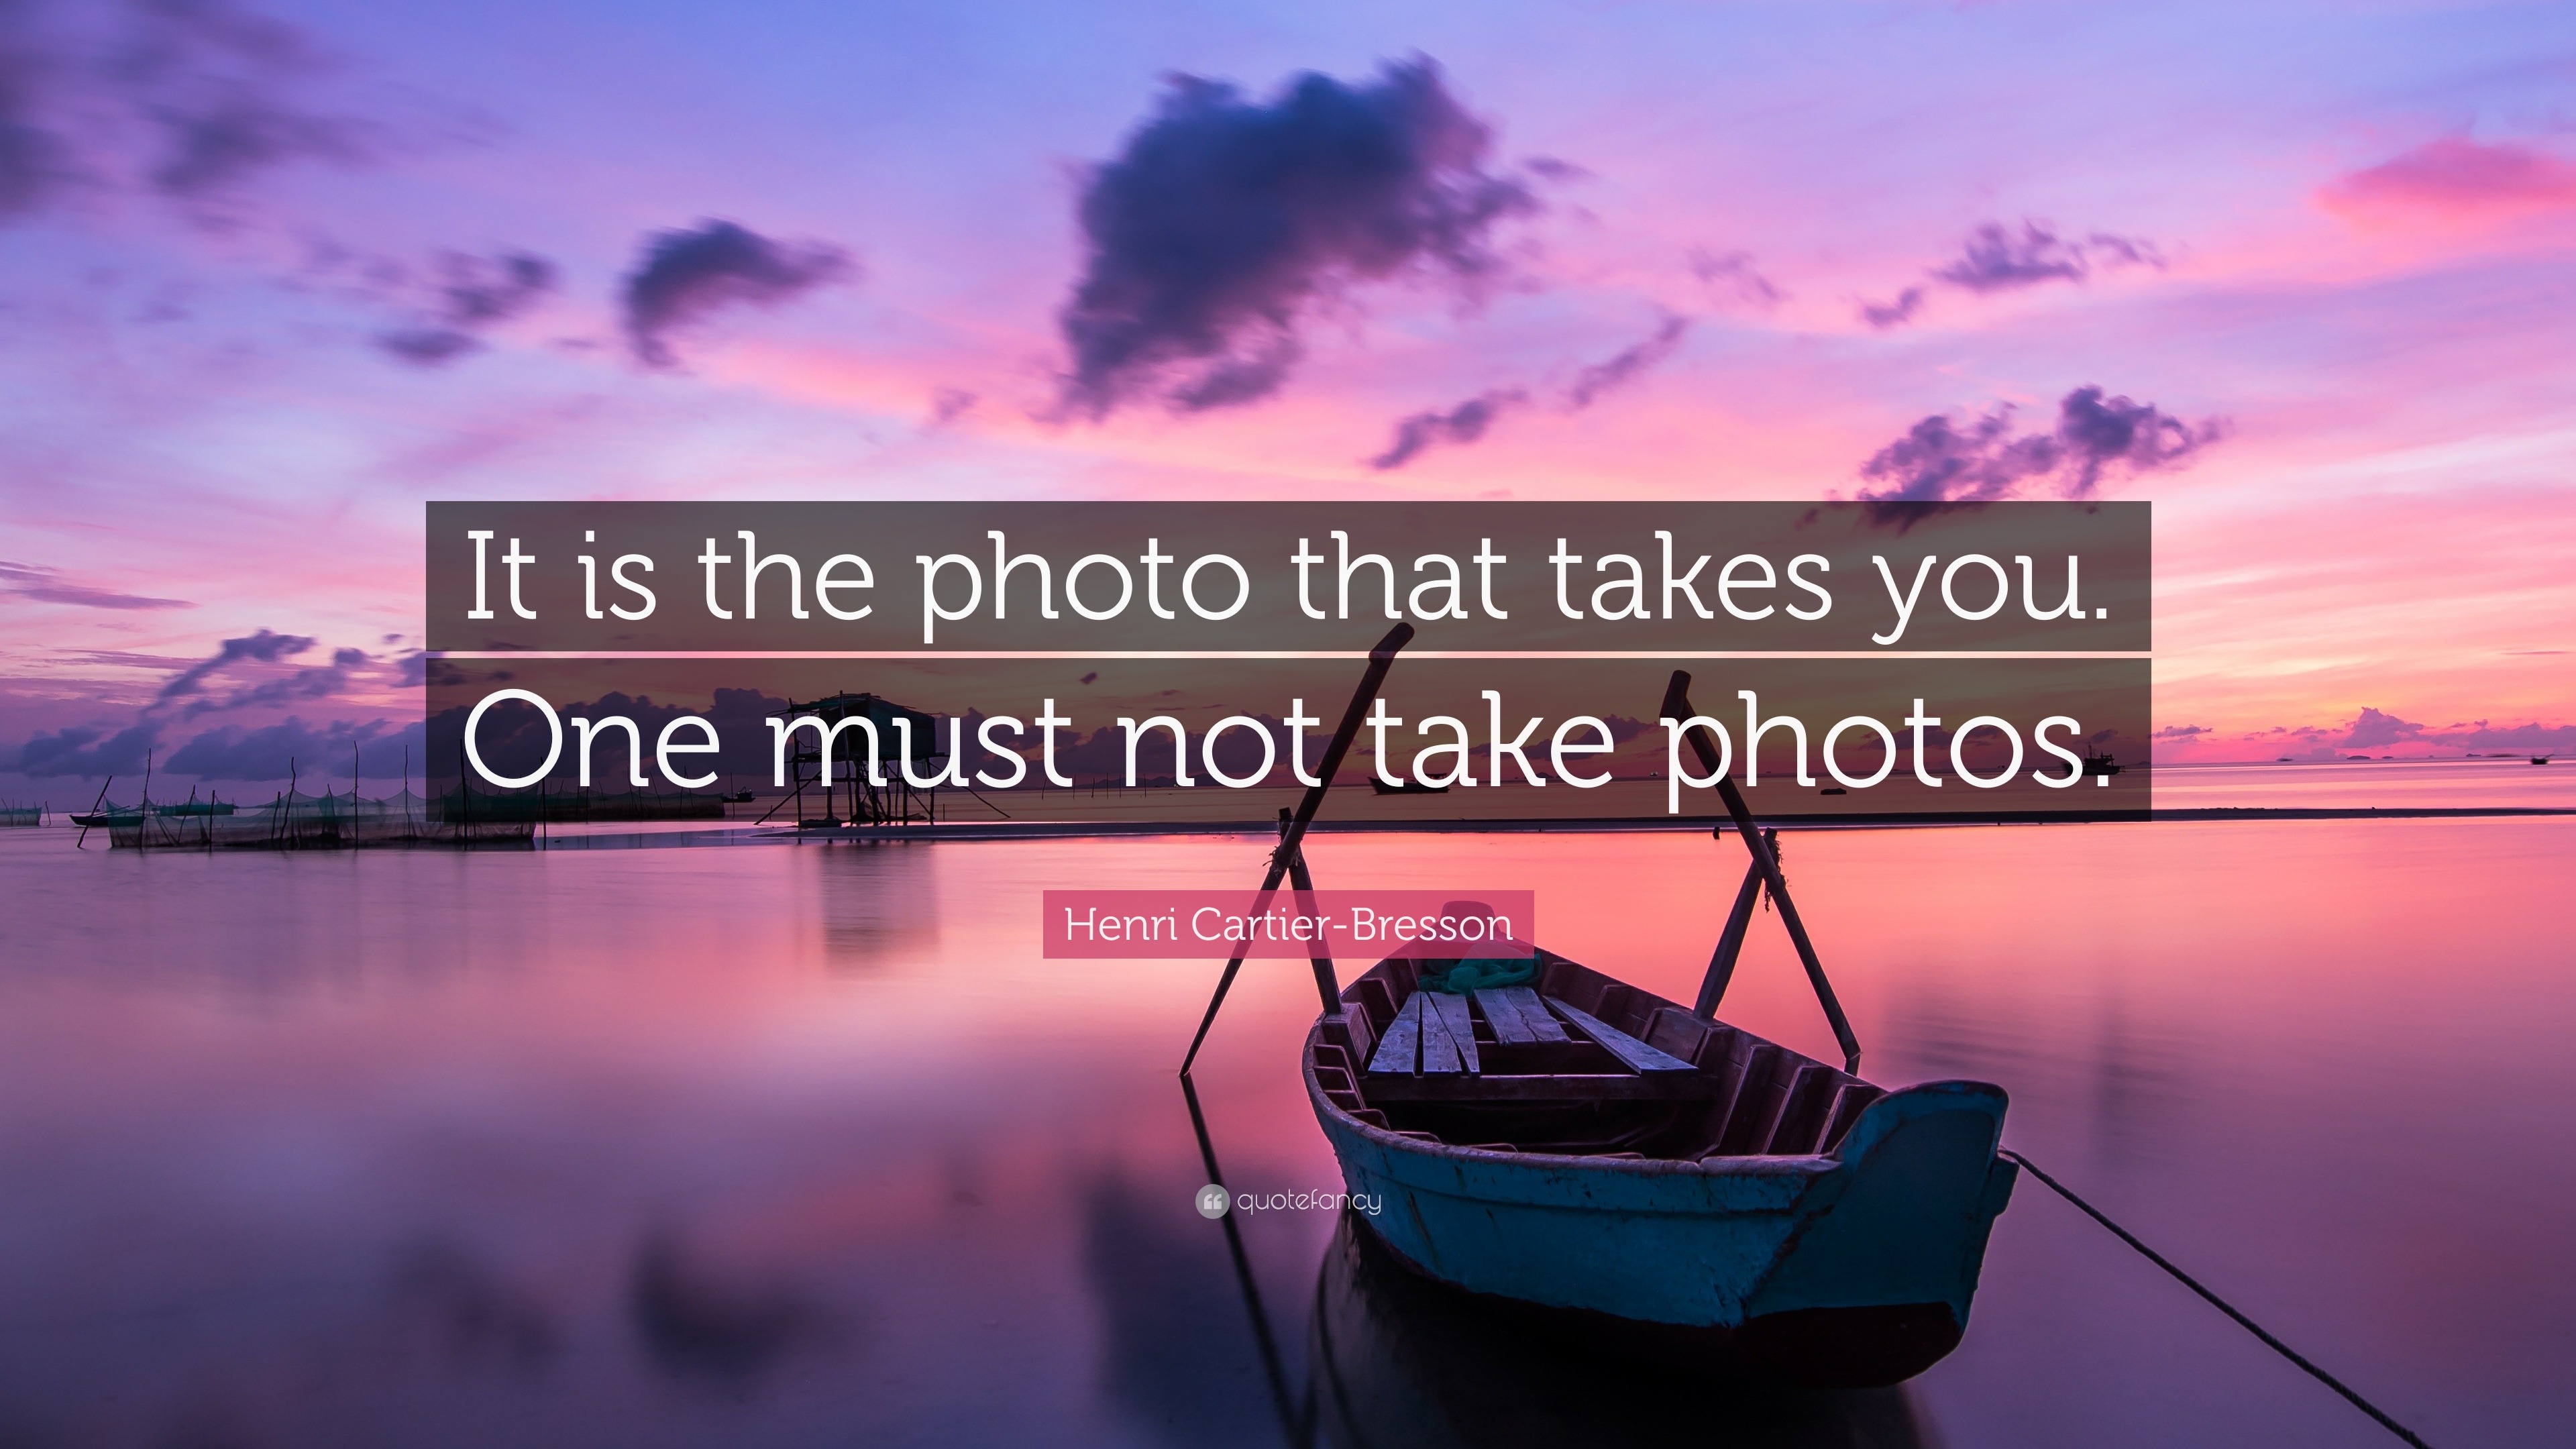 Henri Cartier-Bresson Quote: “It is the photo that takes you. One must ...